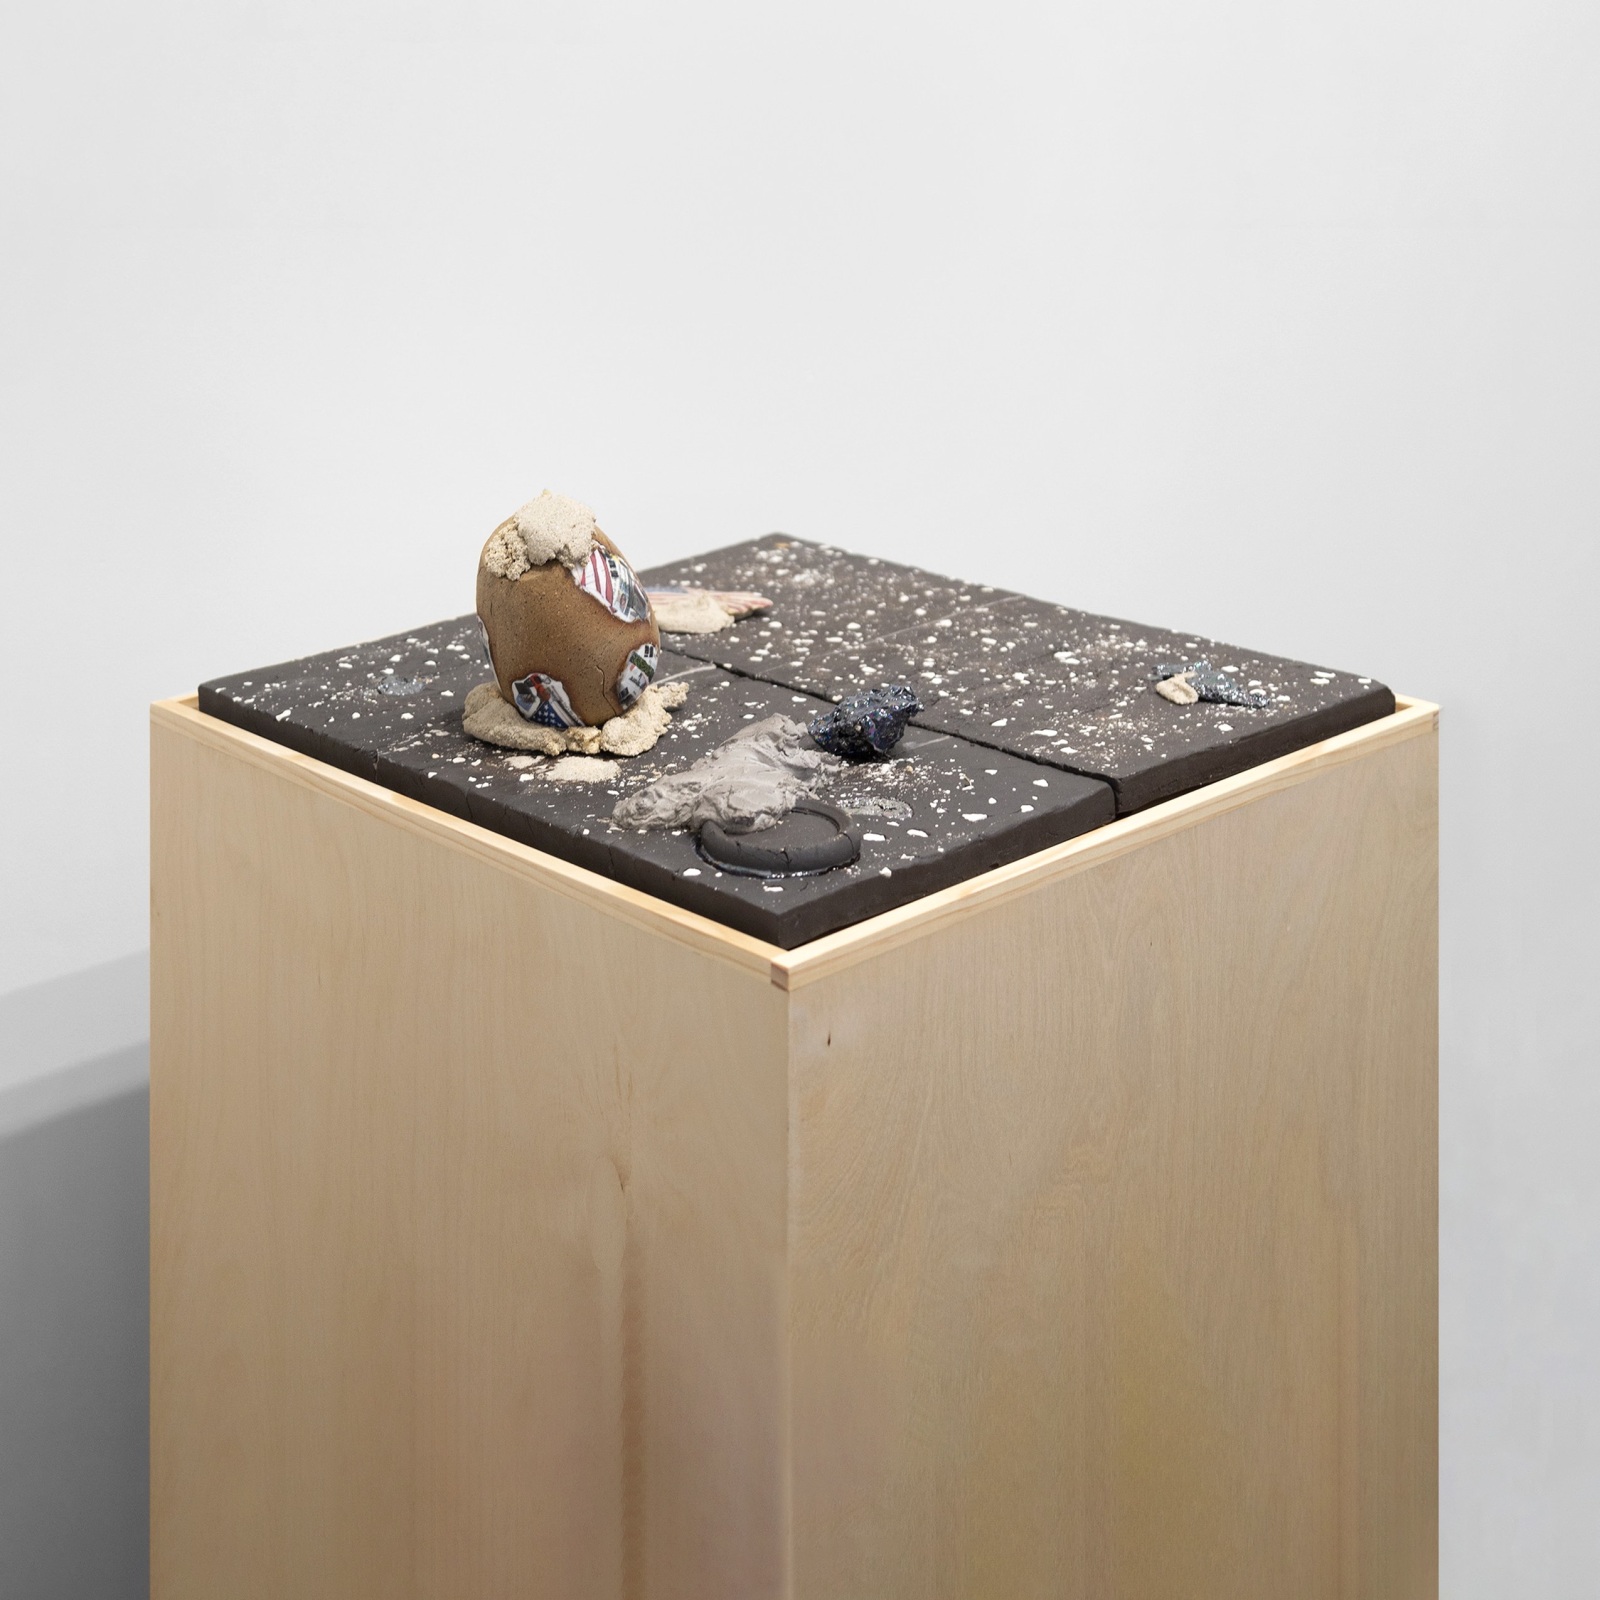 Kahlil Robert Irving, Concrete Nodes and Moon chunks |Street stars and fragments (Mixedvessel)